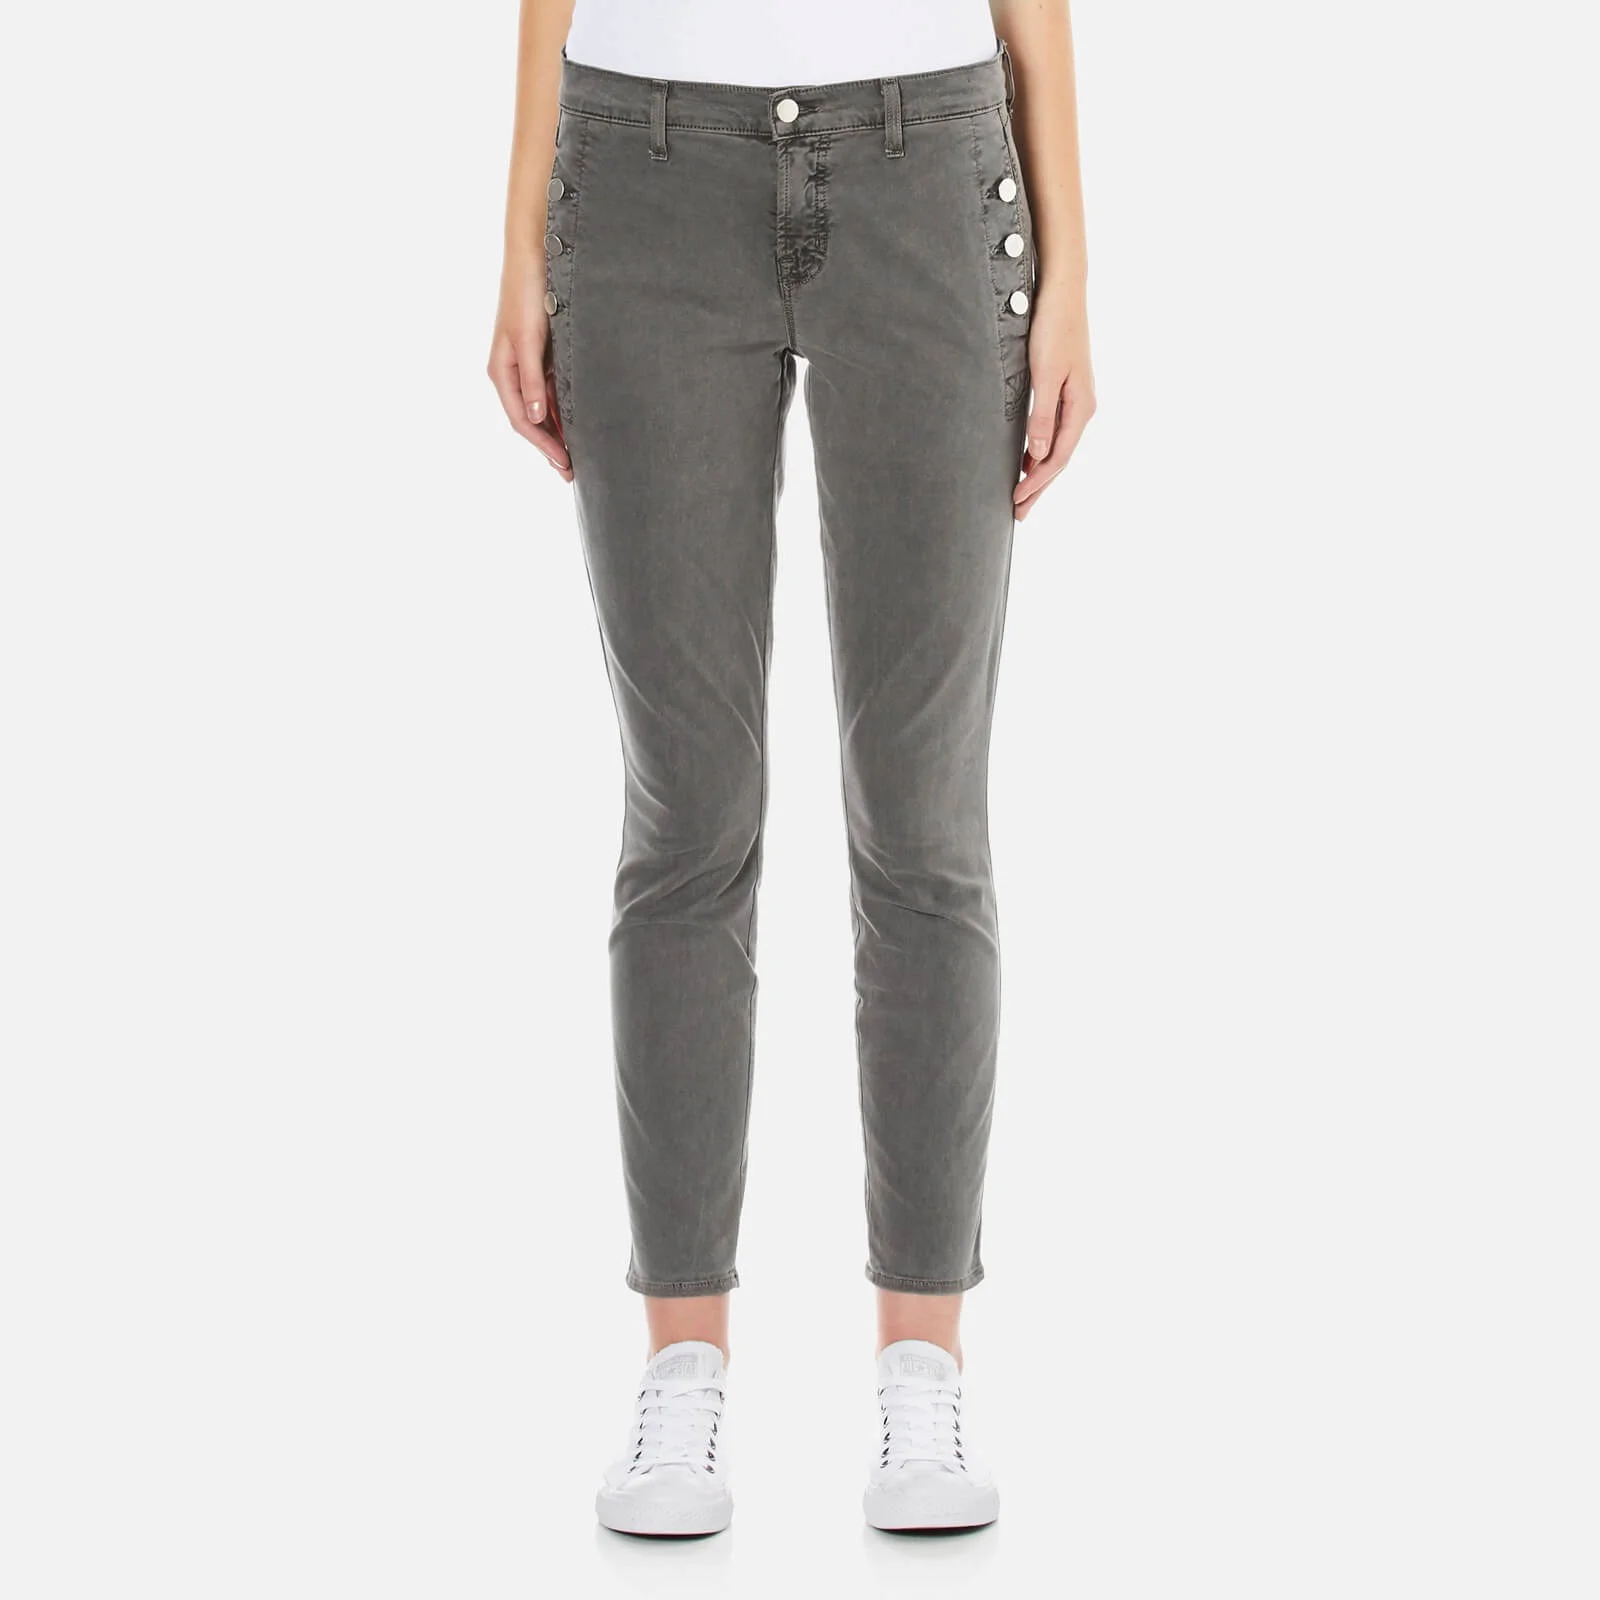 J Brand Women's Zion Mid Rise Skinny Jeans with Button Pockets - Distressed Silver Fox Image 1